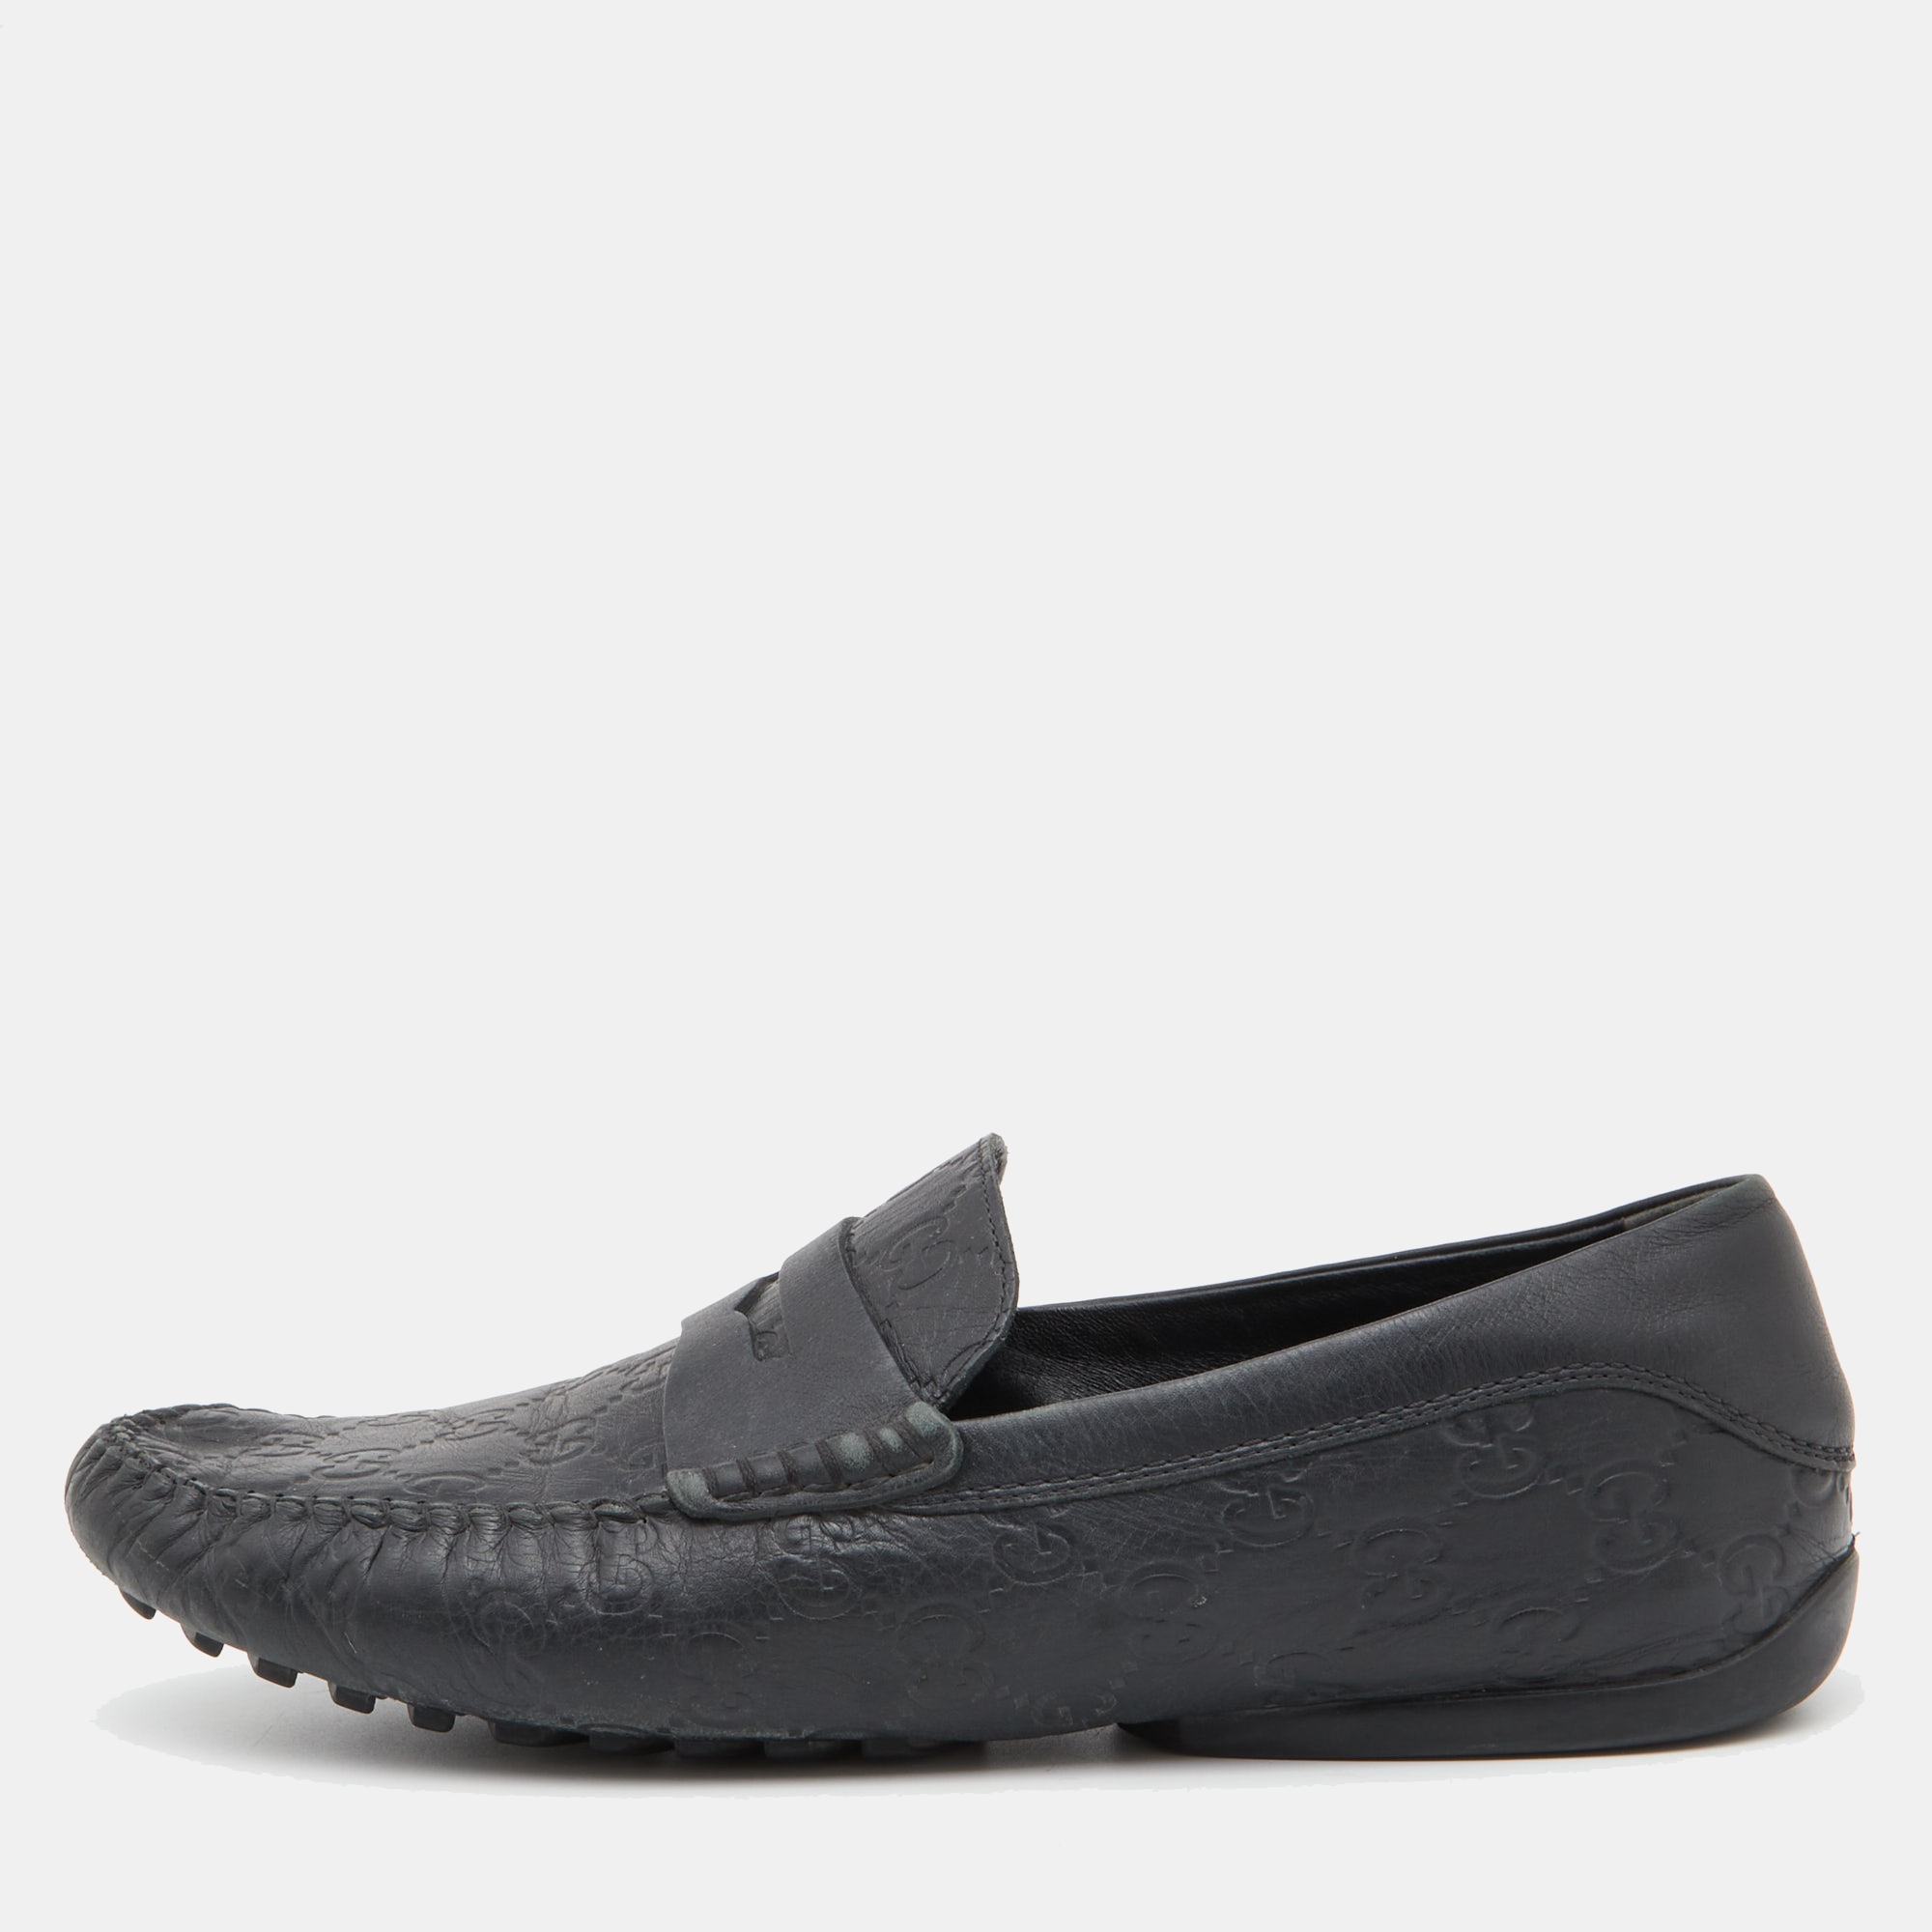 

Gucci Guccissima Leather Penny Slip On Loafers Size, Black